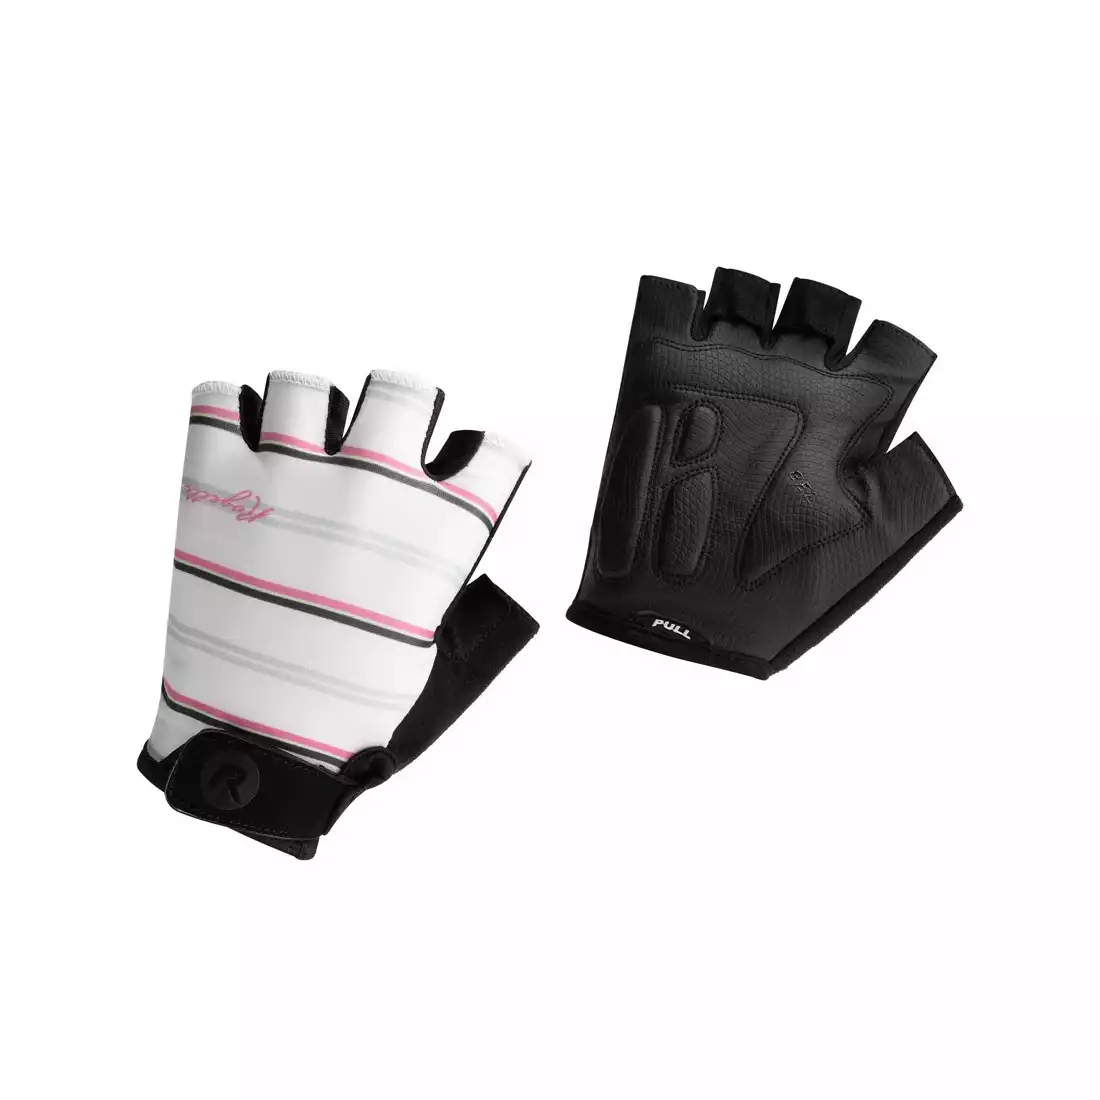 ROGELLI Women's cycling gloves STRIPE, white and pink